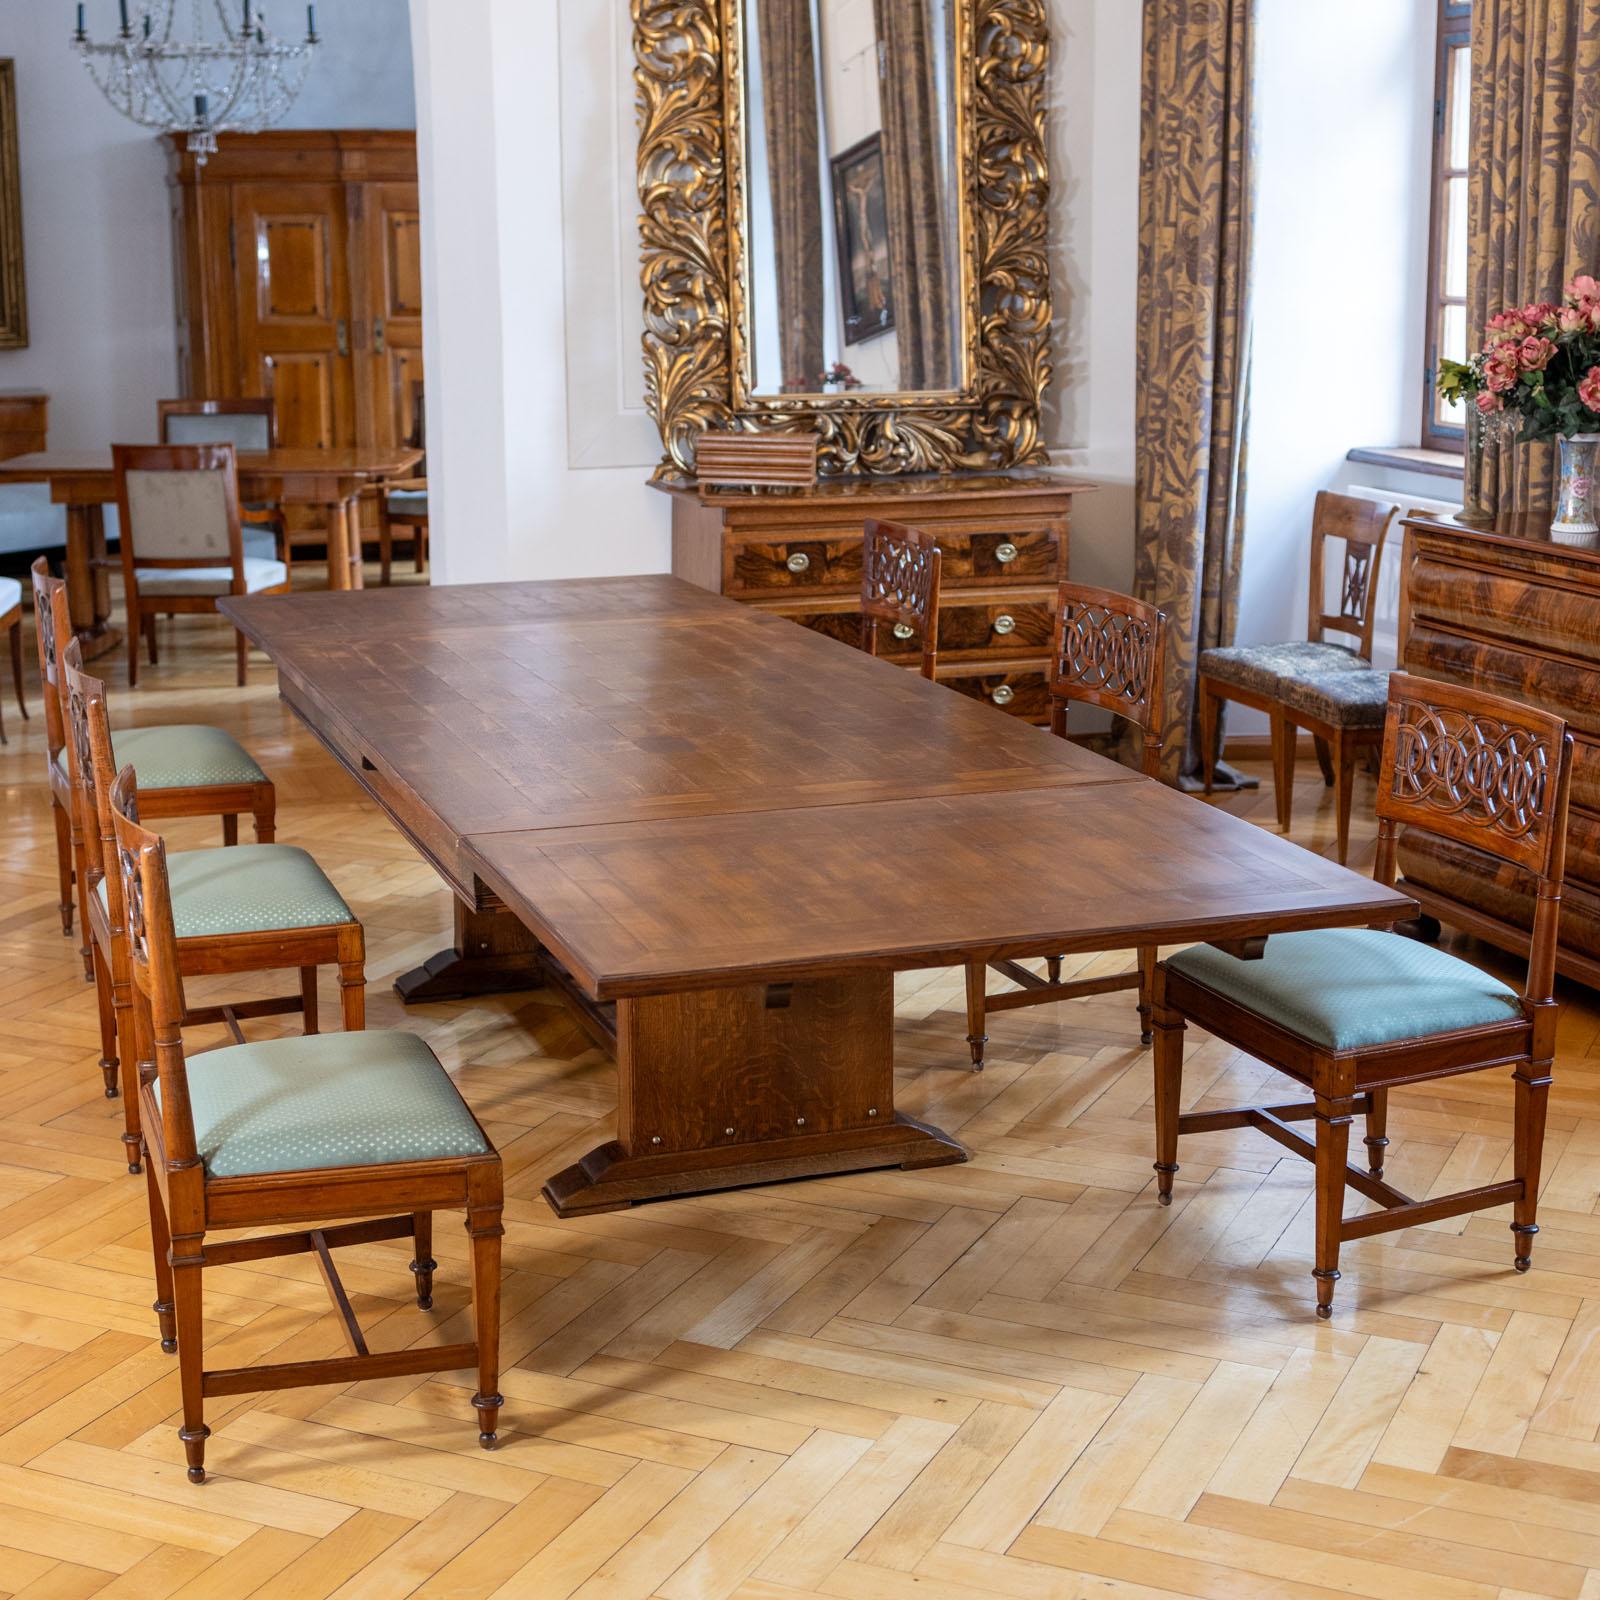 Large Art Nouveau Extension Table in Oak, Early 20th Century For Sale 2